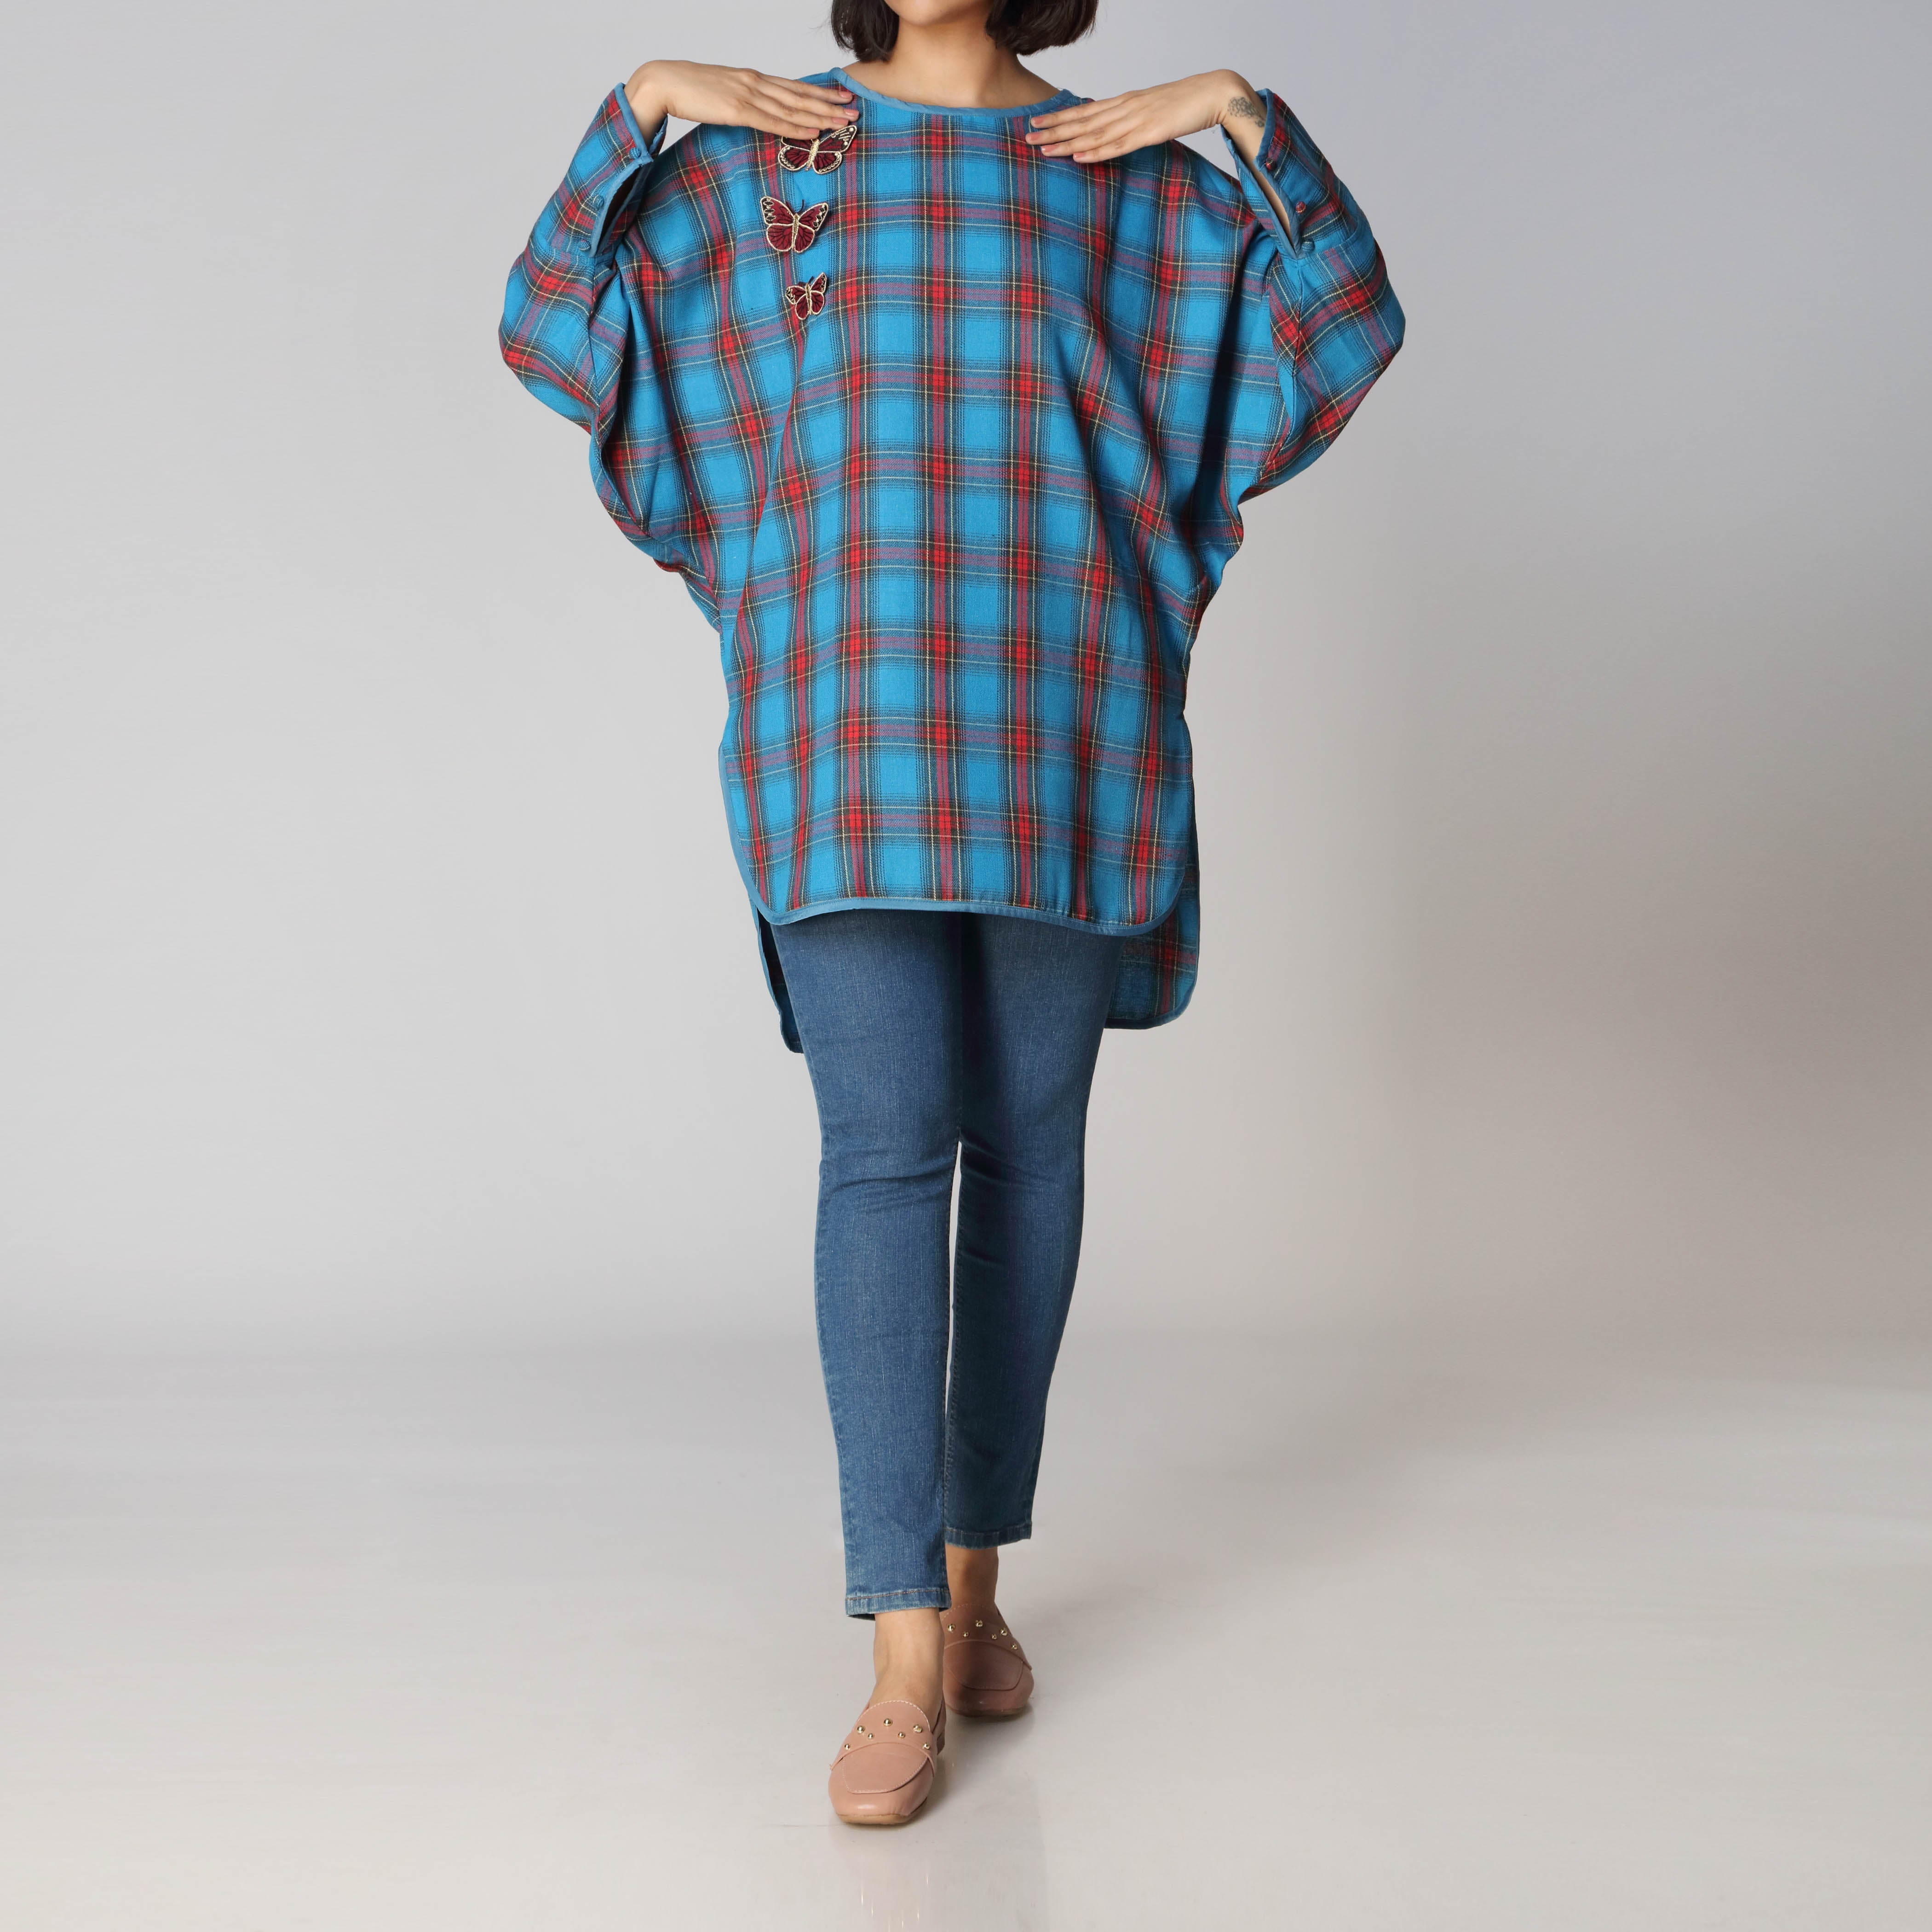 1PC- Flannel Checkered Shirt  PW2269